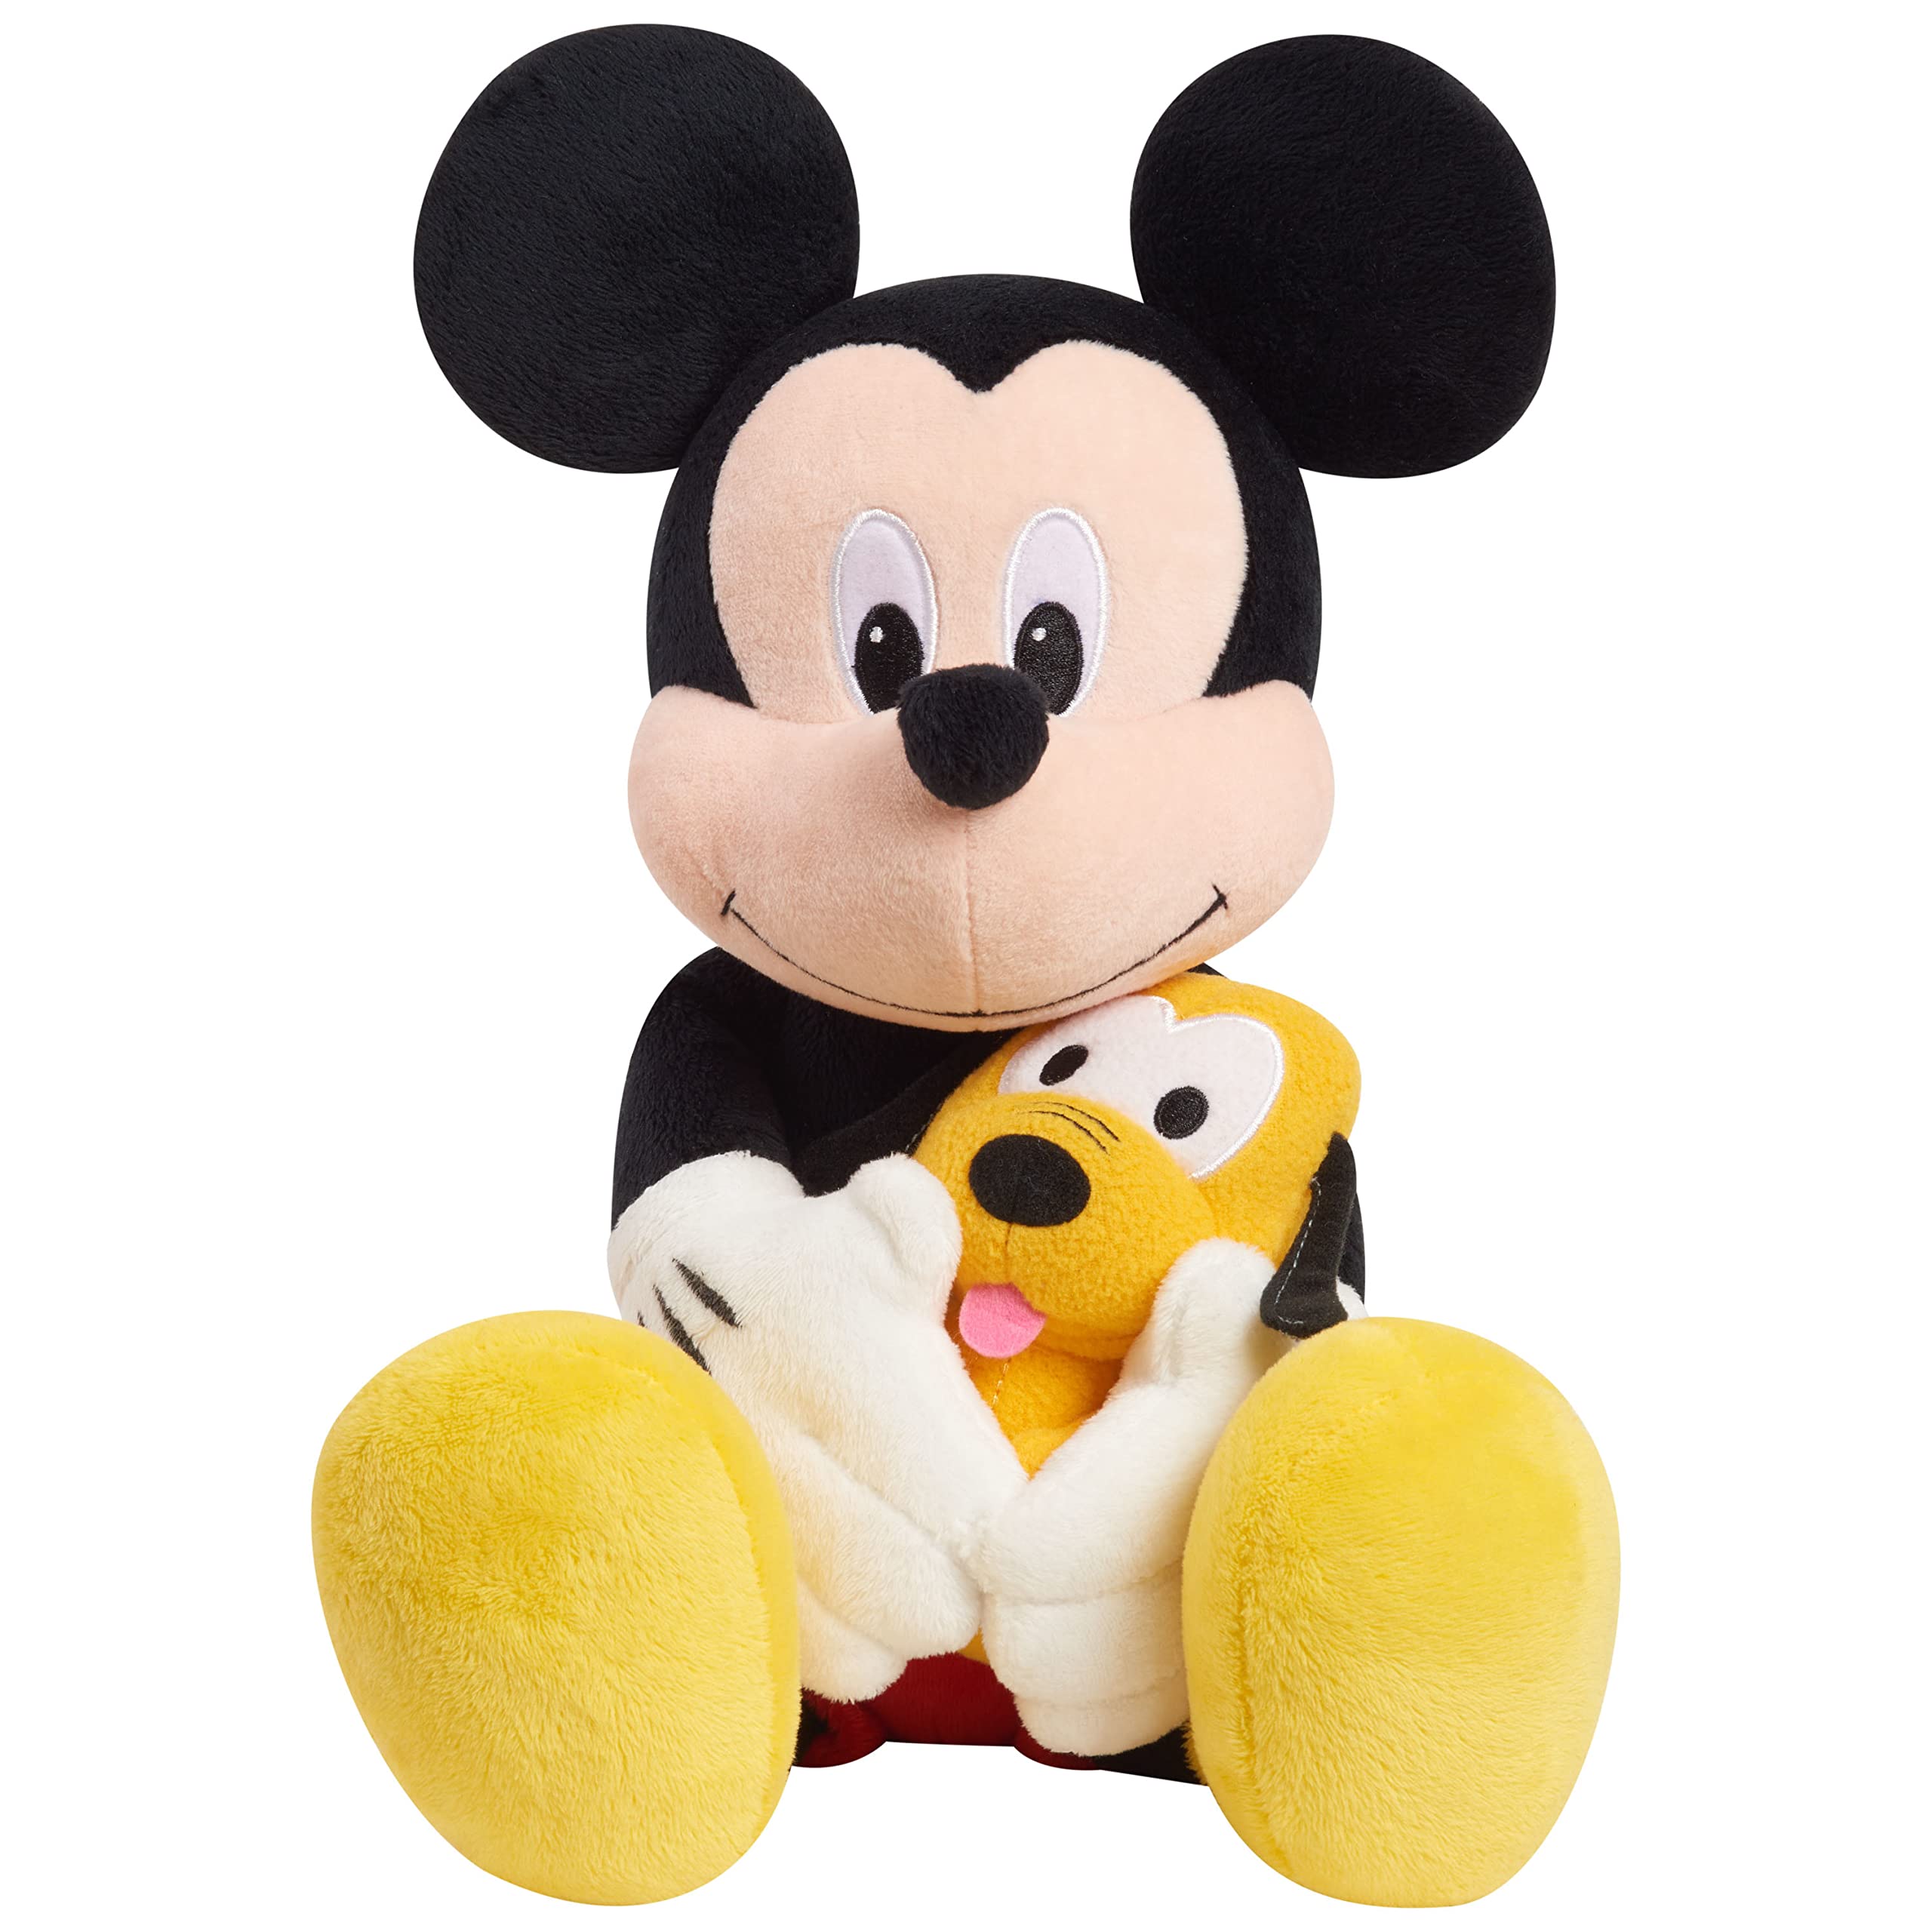 DISNEY CLASSIC Lil Friends Mickey Mouse and Pluto Plush Stuffed Animal, Officially Licensed Kids Toys for Ages 0+ by Just Play